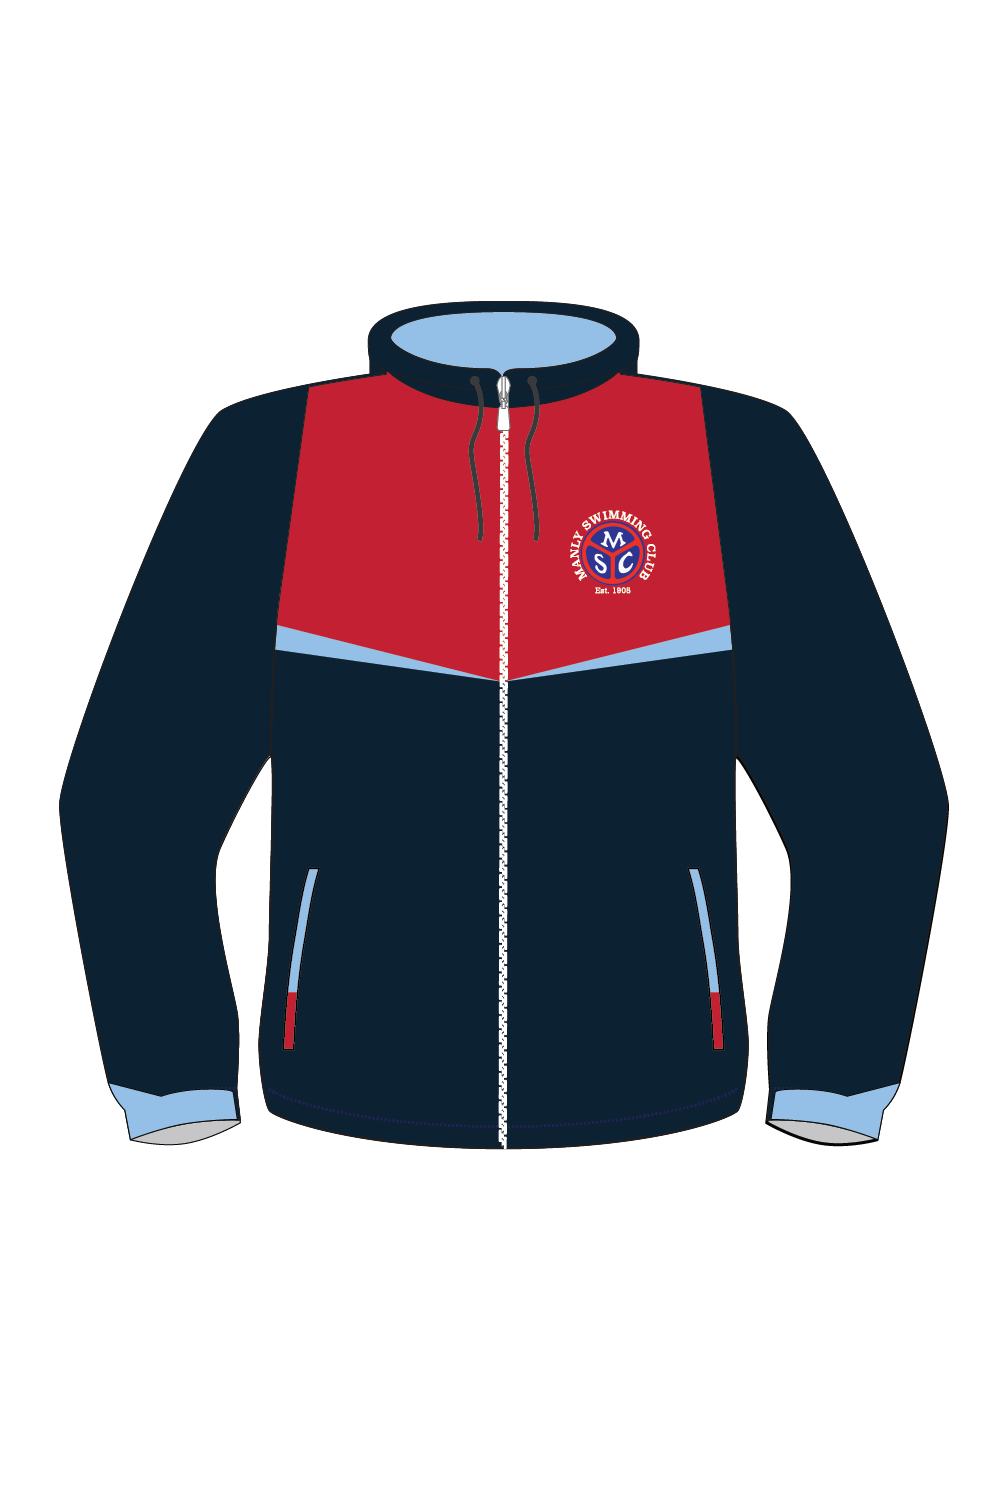 Manly Swimming Club Tracksuit Jacket